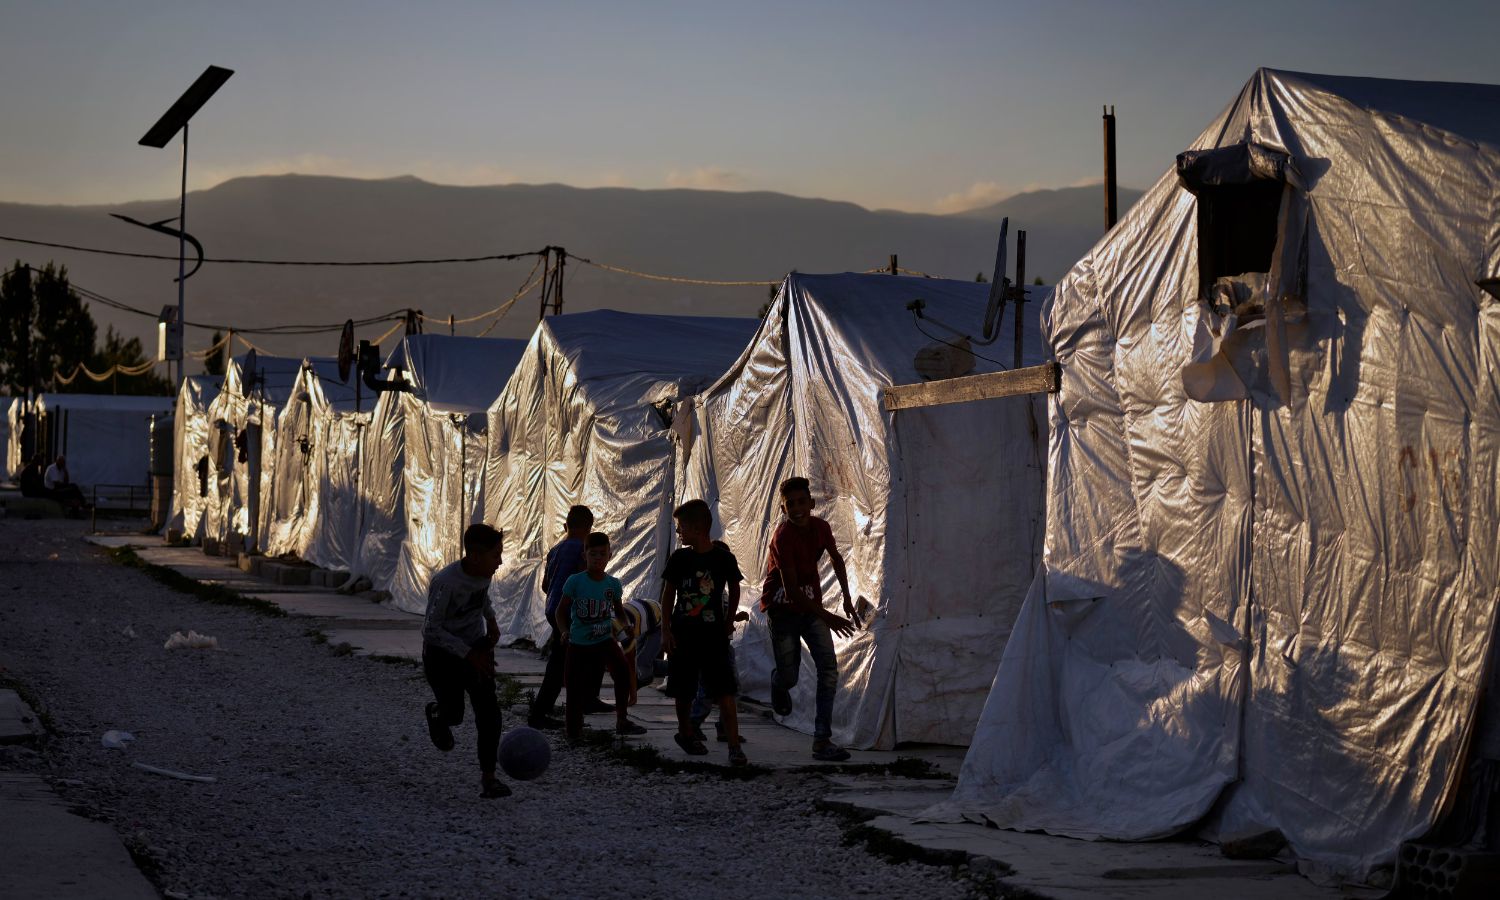 Syrian children play soccer next to their tents in a refugee camp in the town of Bar Elias in the Bekaa Valley, Lebanon - July 7, 2022 (AP)